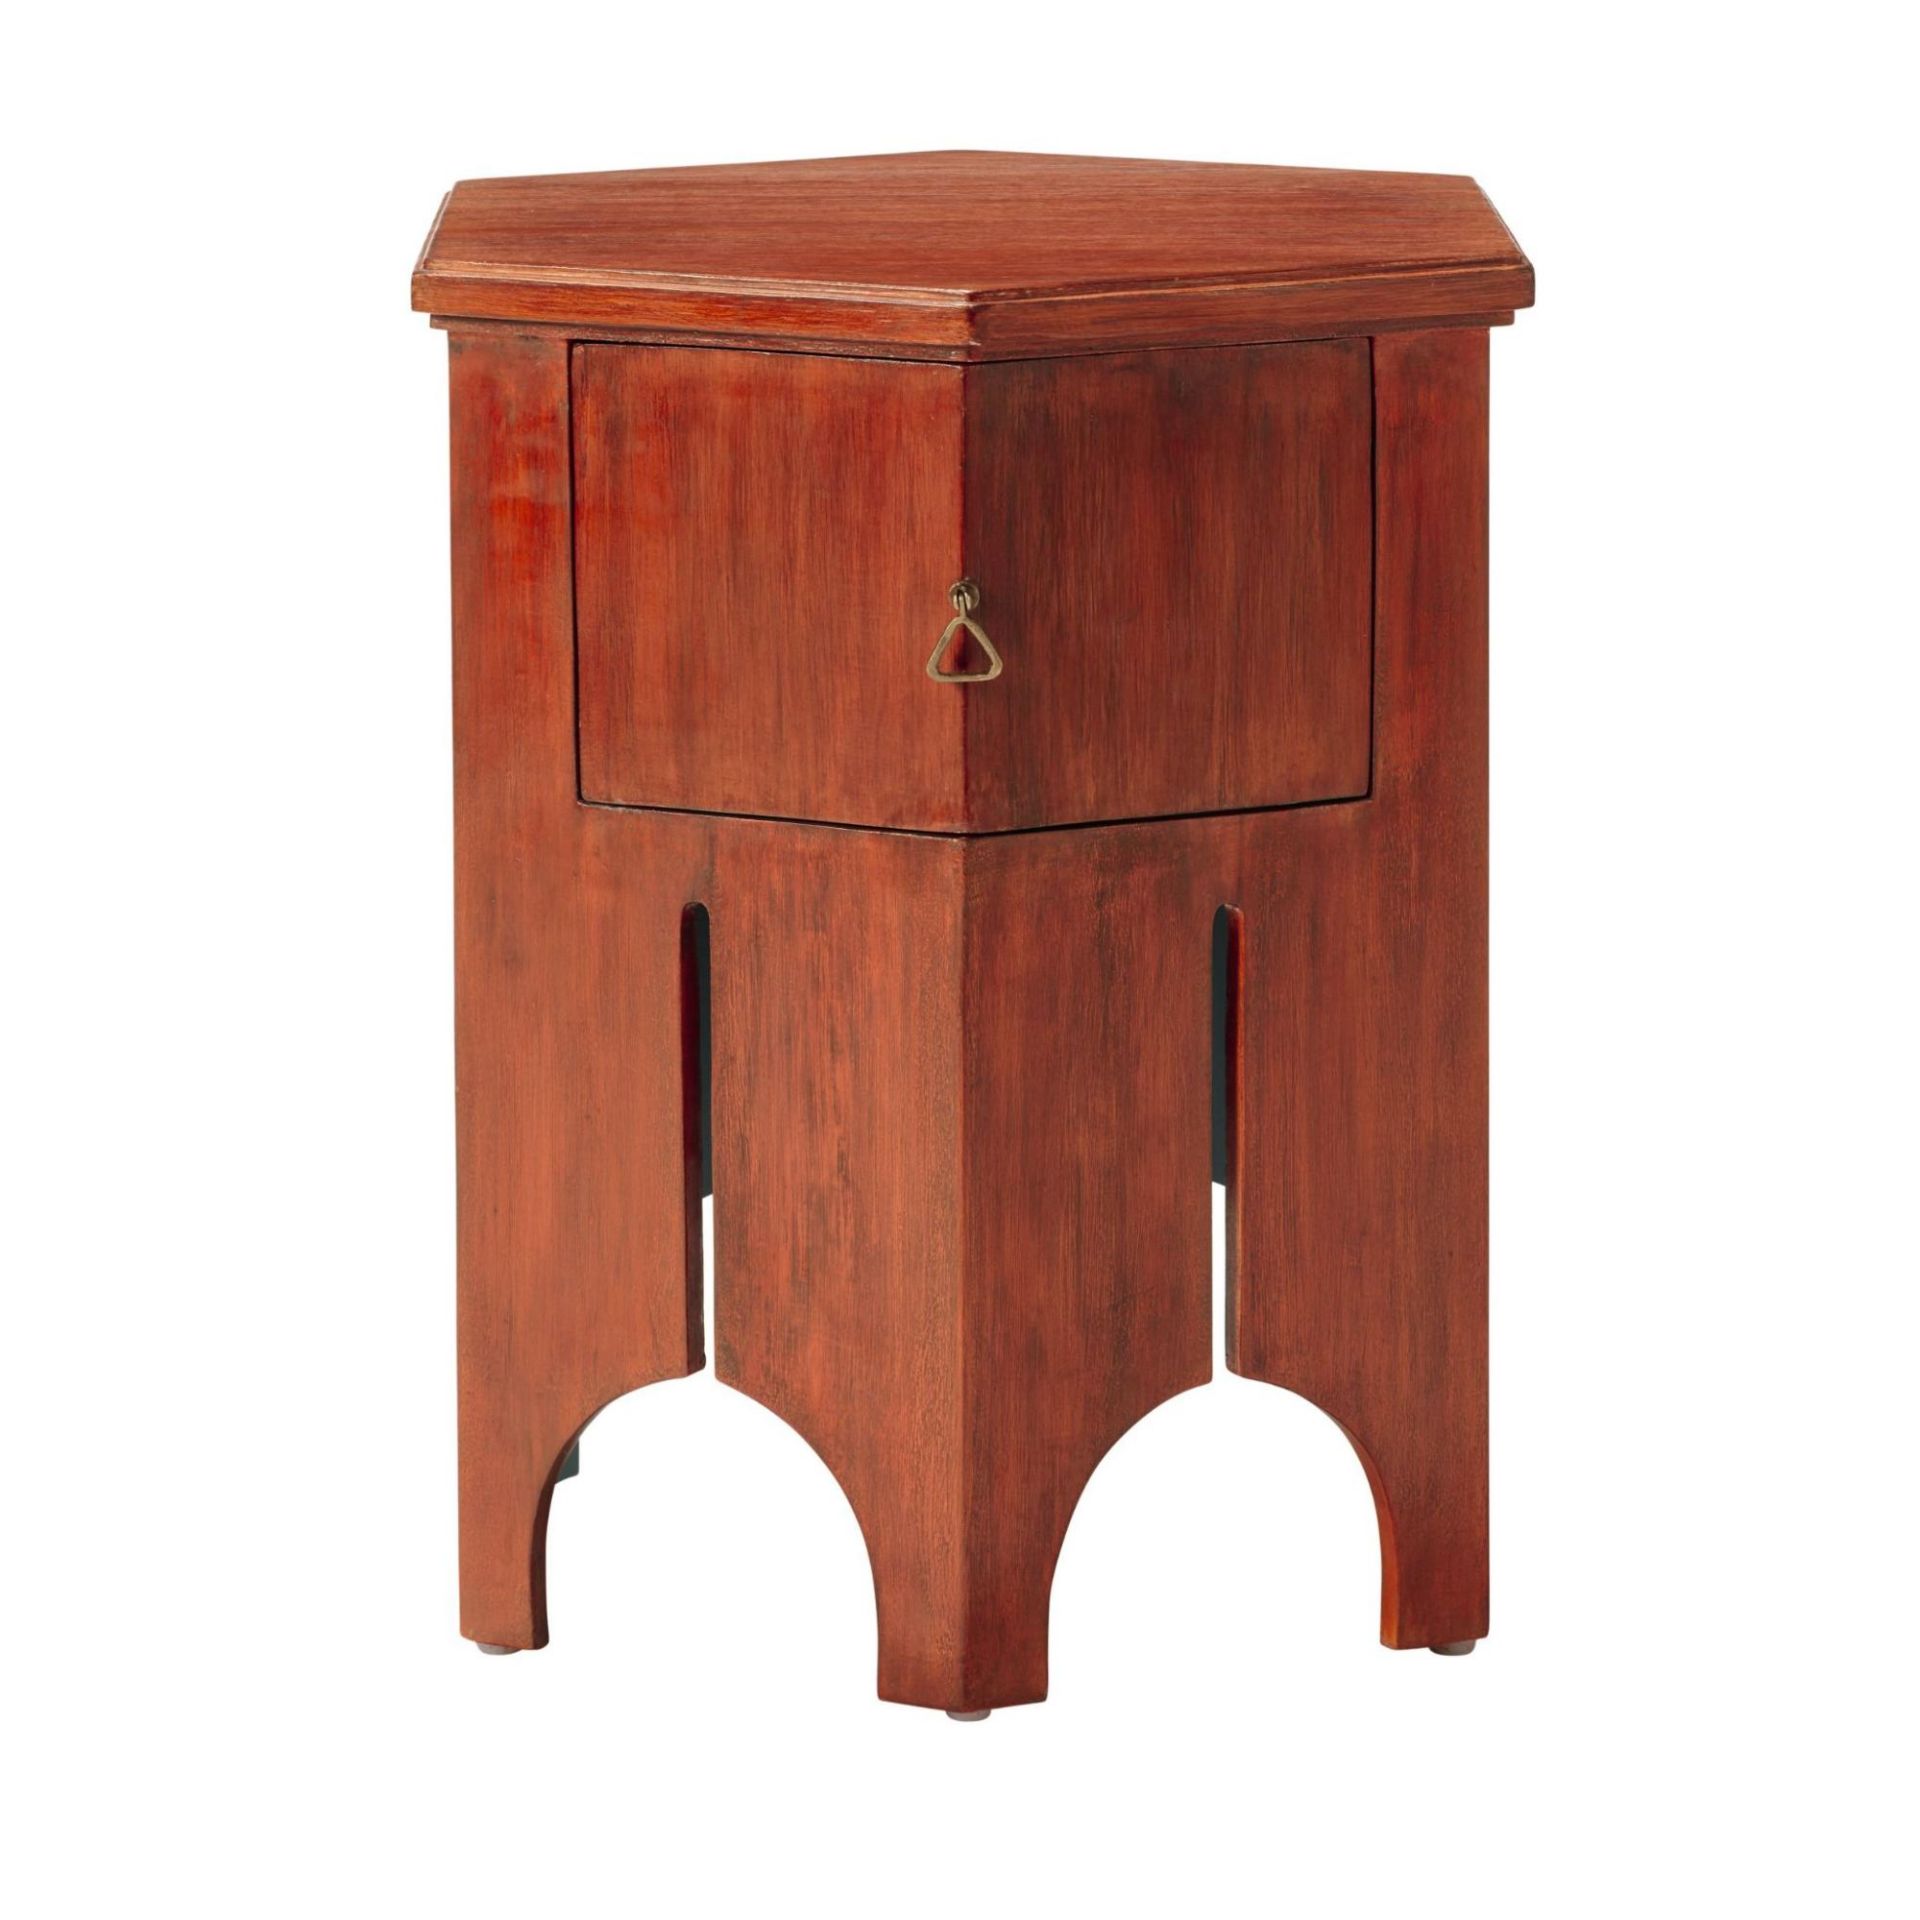 Finished to a rich red, this hexagonal side table draws inspiration from Morocco. Its drawer